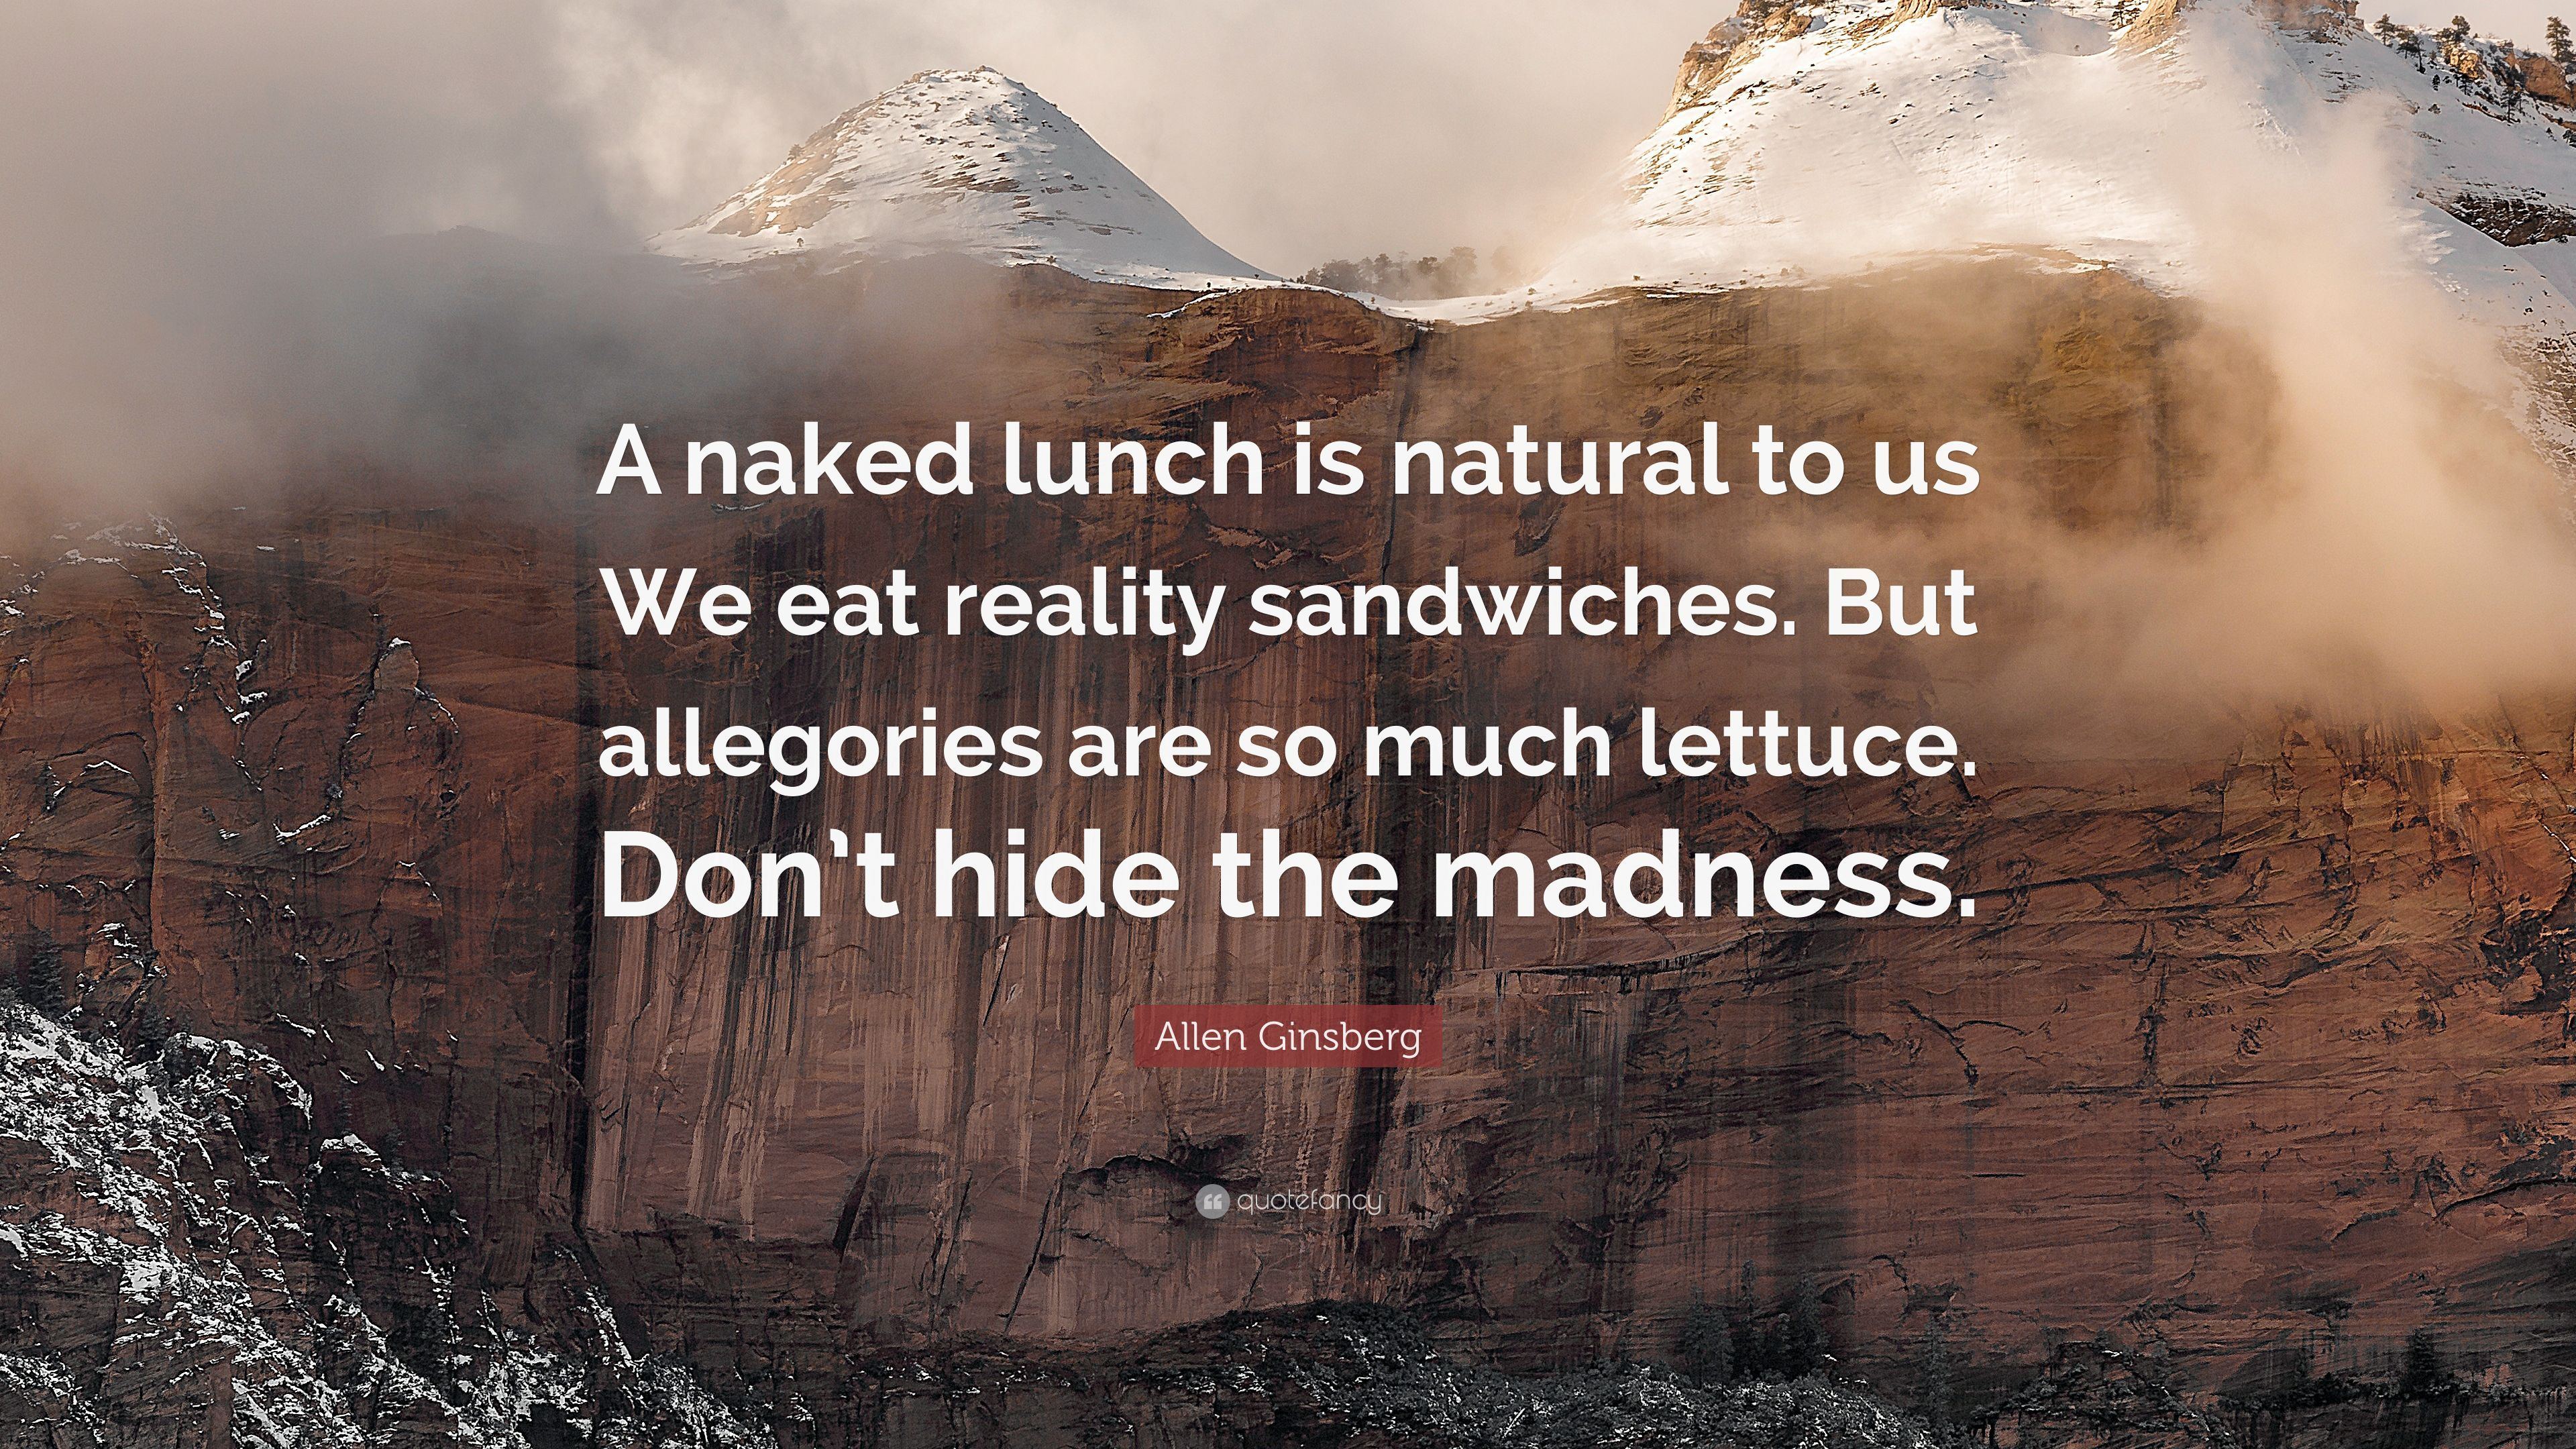 A naked lunch is natural to us